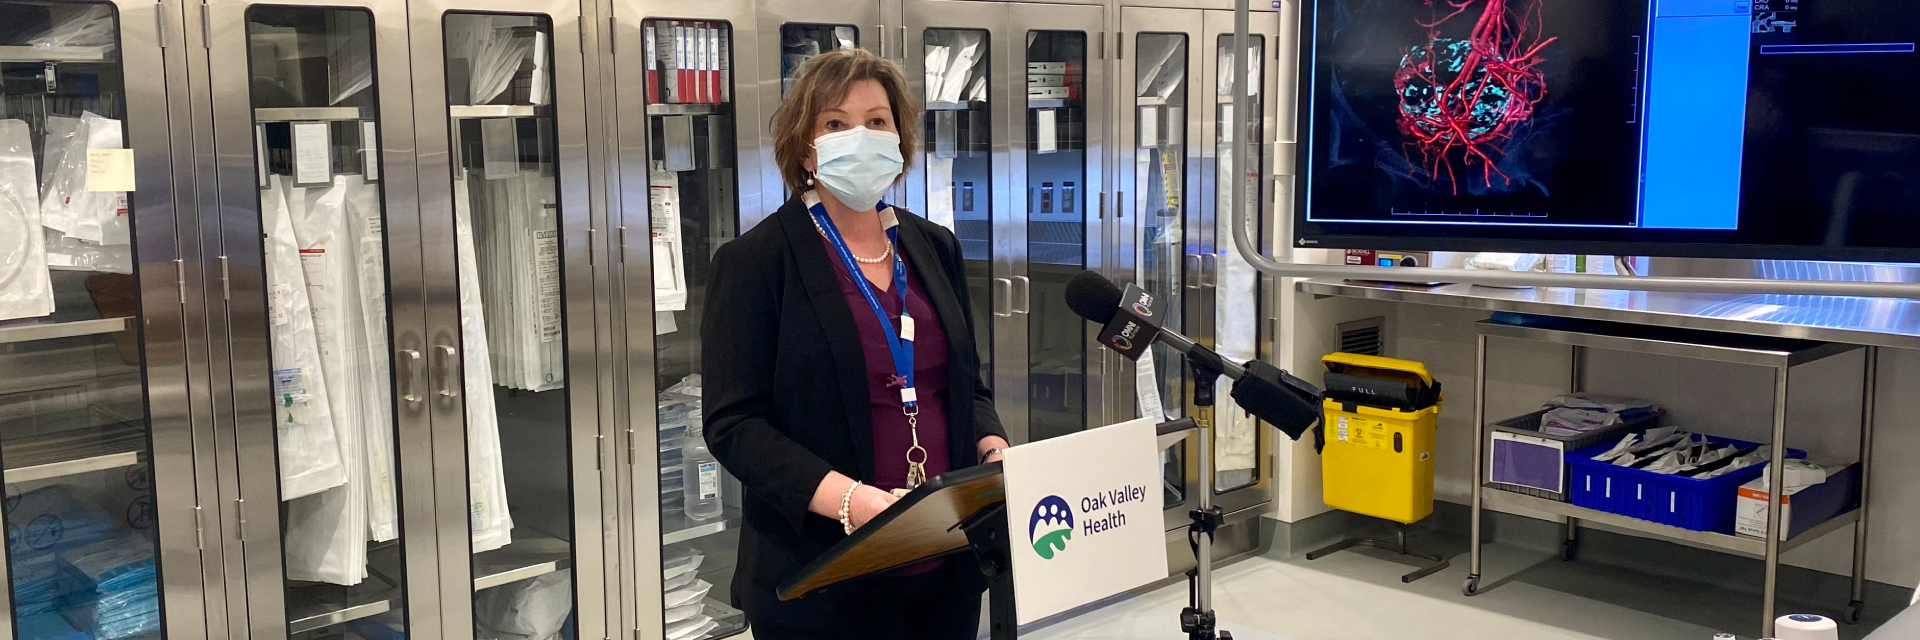 Jo-anne mar stands at a podium with a microphone and addresses the board of directors in the new radiology suite